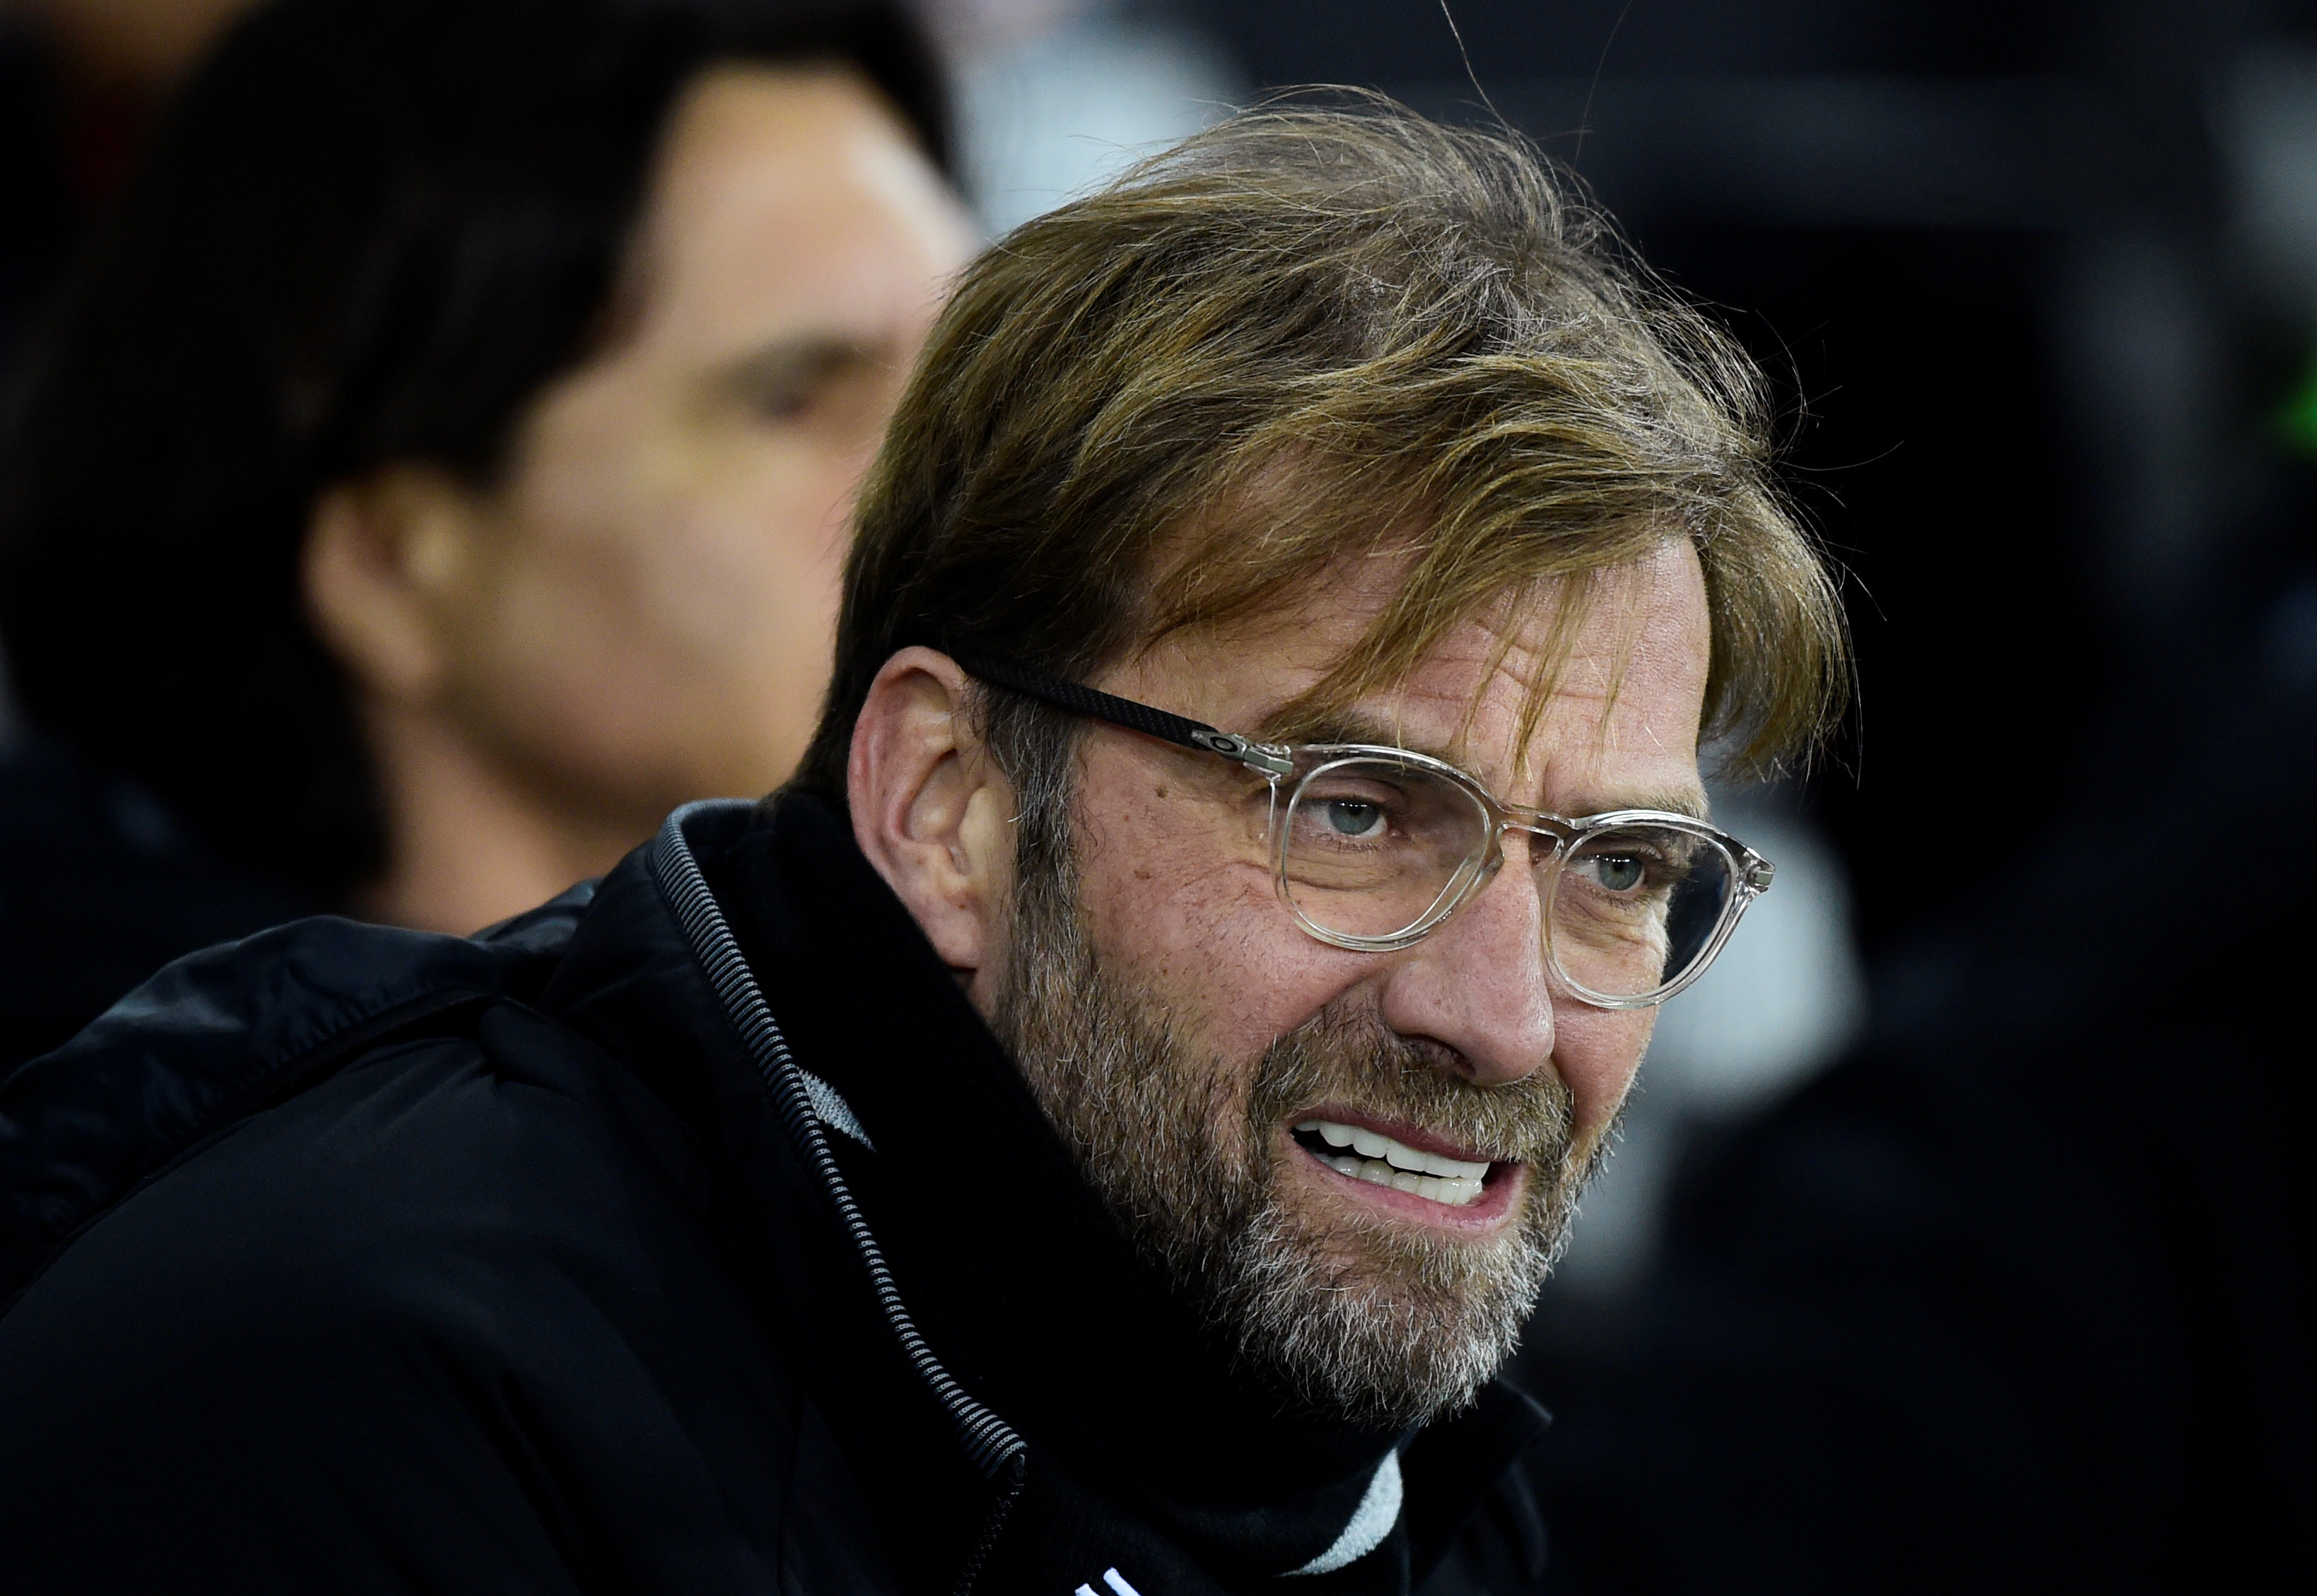 Football: Frustrated Klopp sees Liverpool flop at Swansea